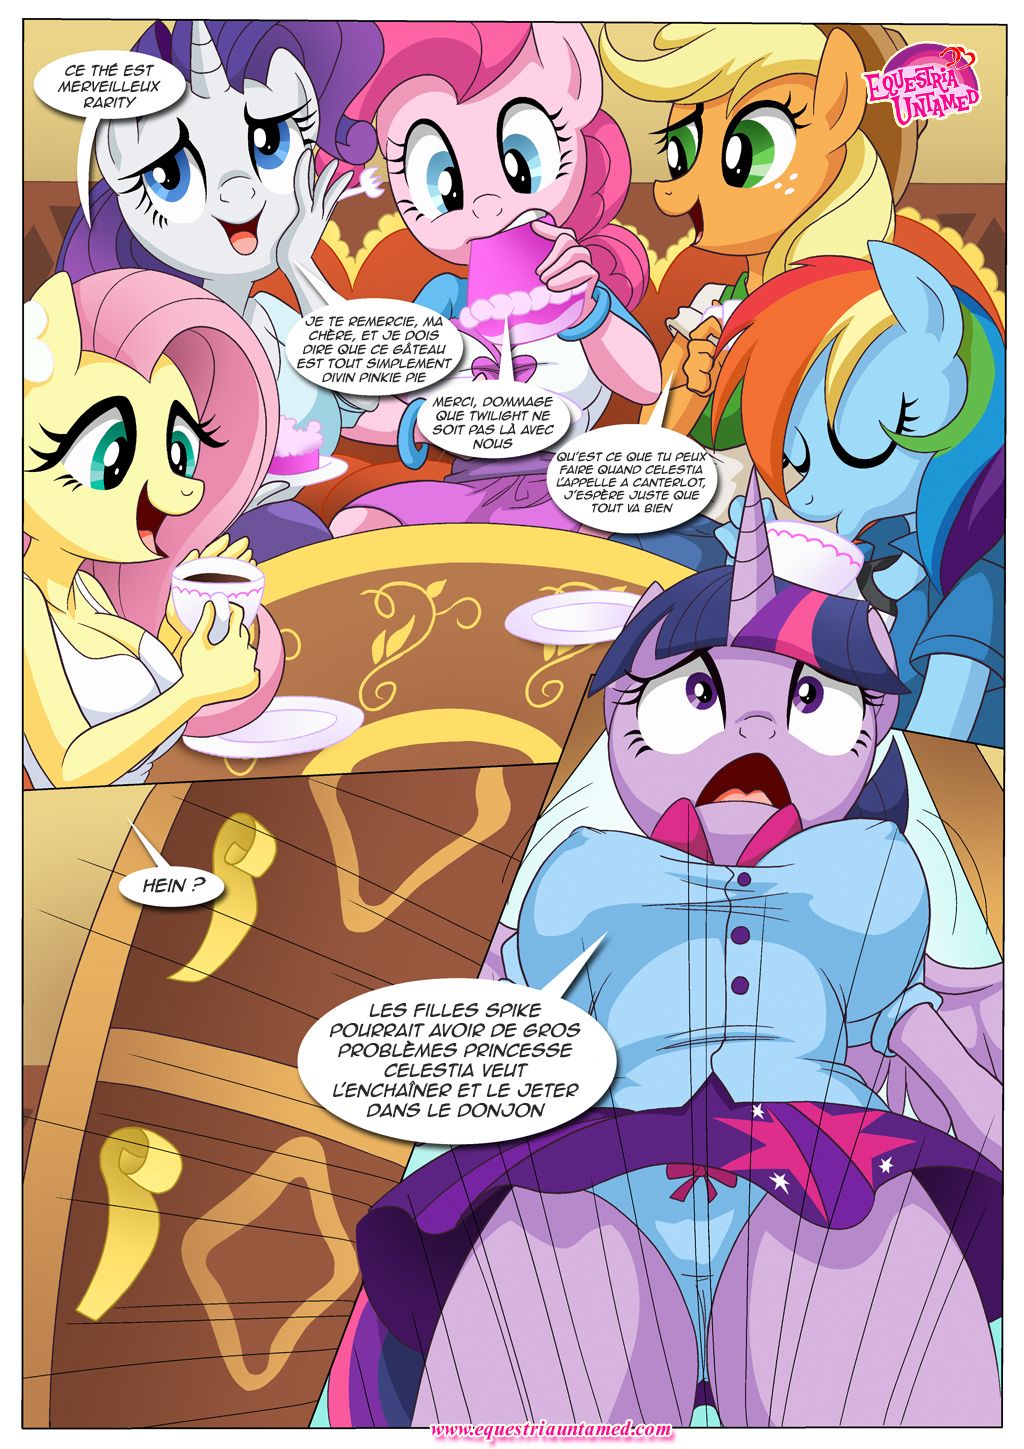 The Power Of Dragon Mating - My Little Pony Friendship Is Magic by Palcomix  - TeenSpiritHentai